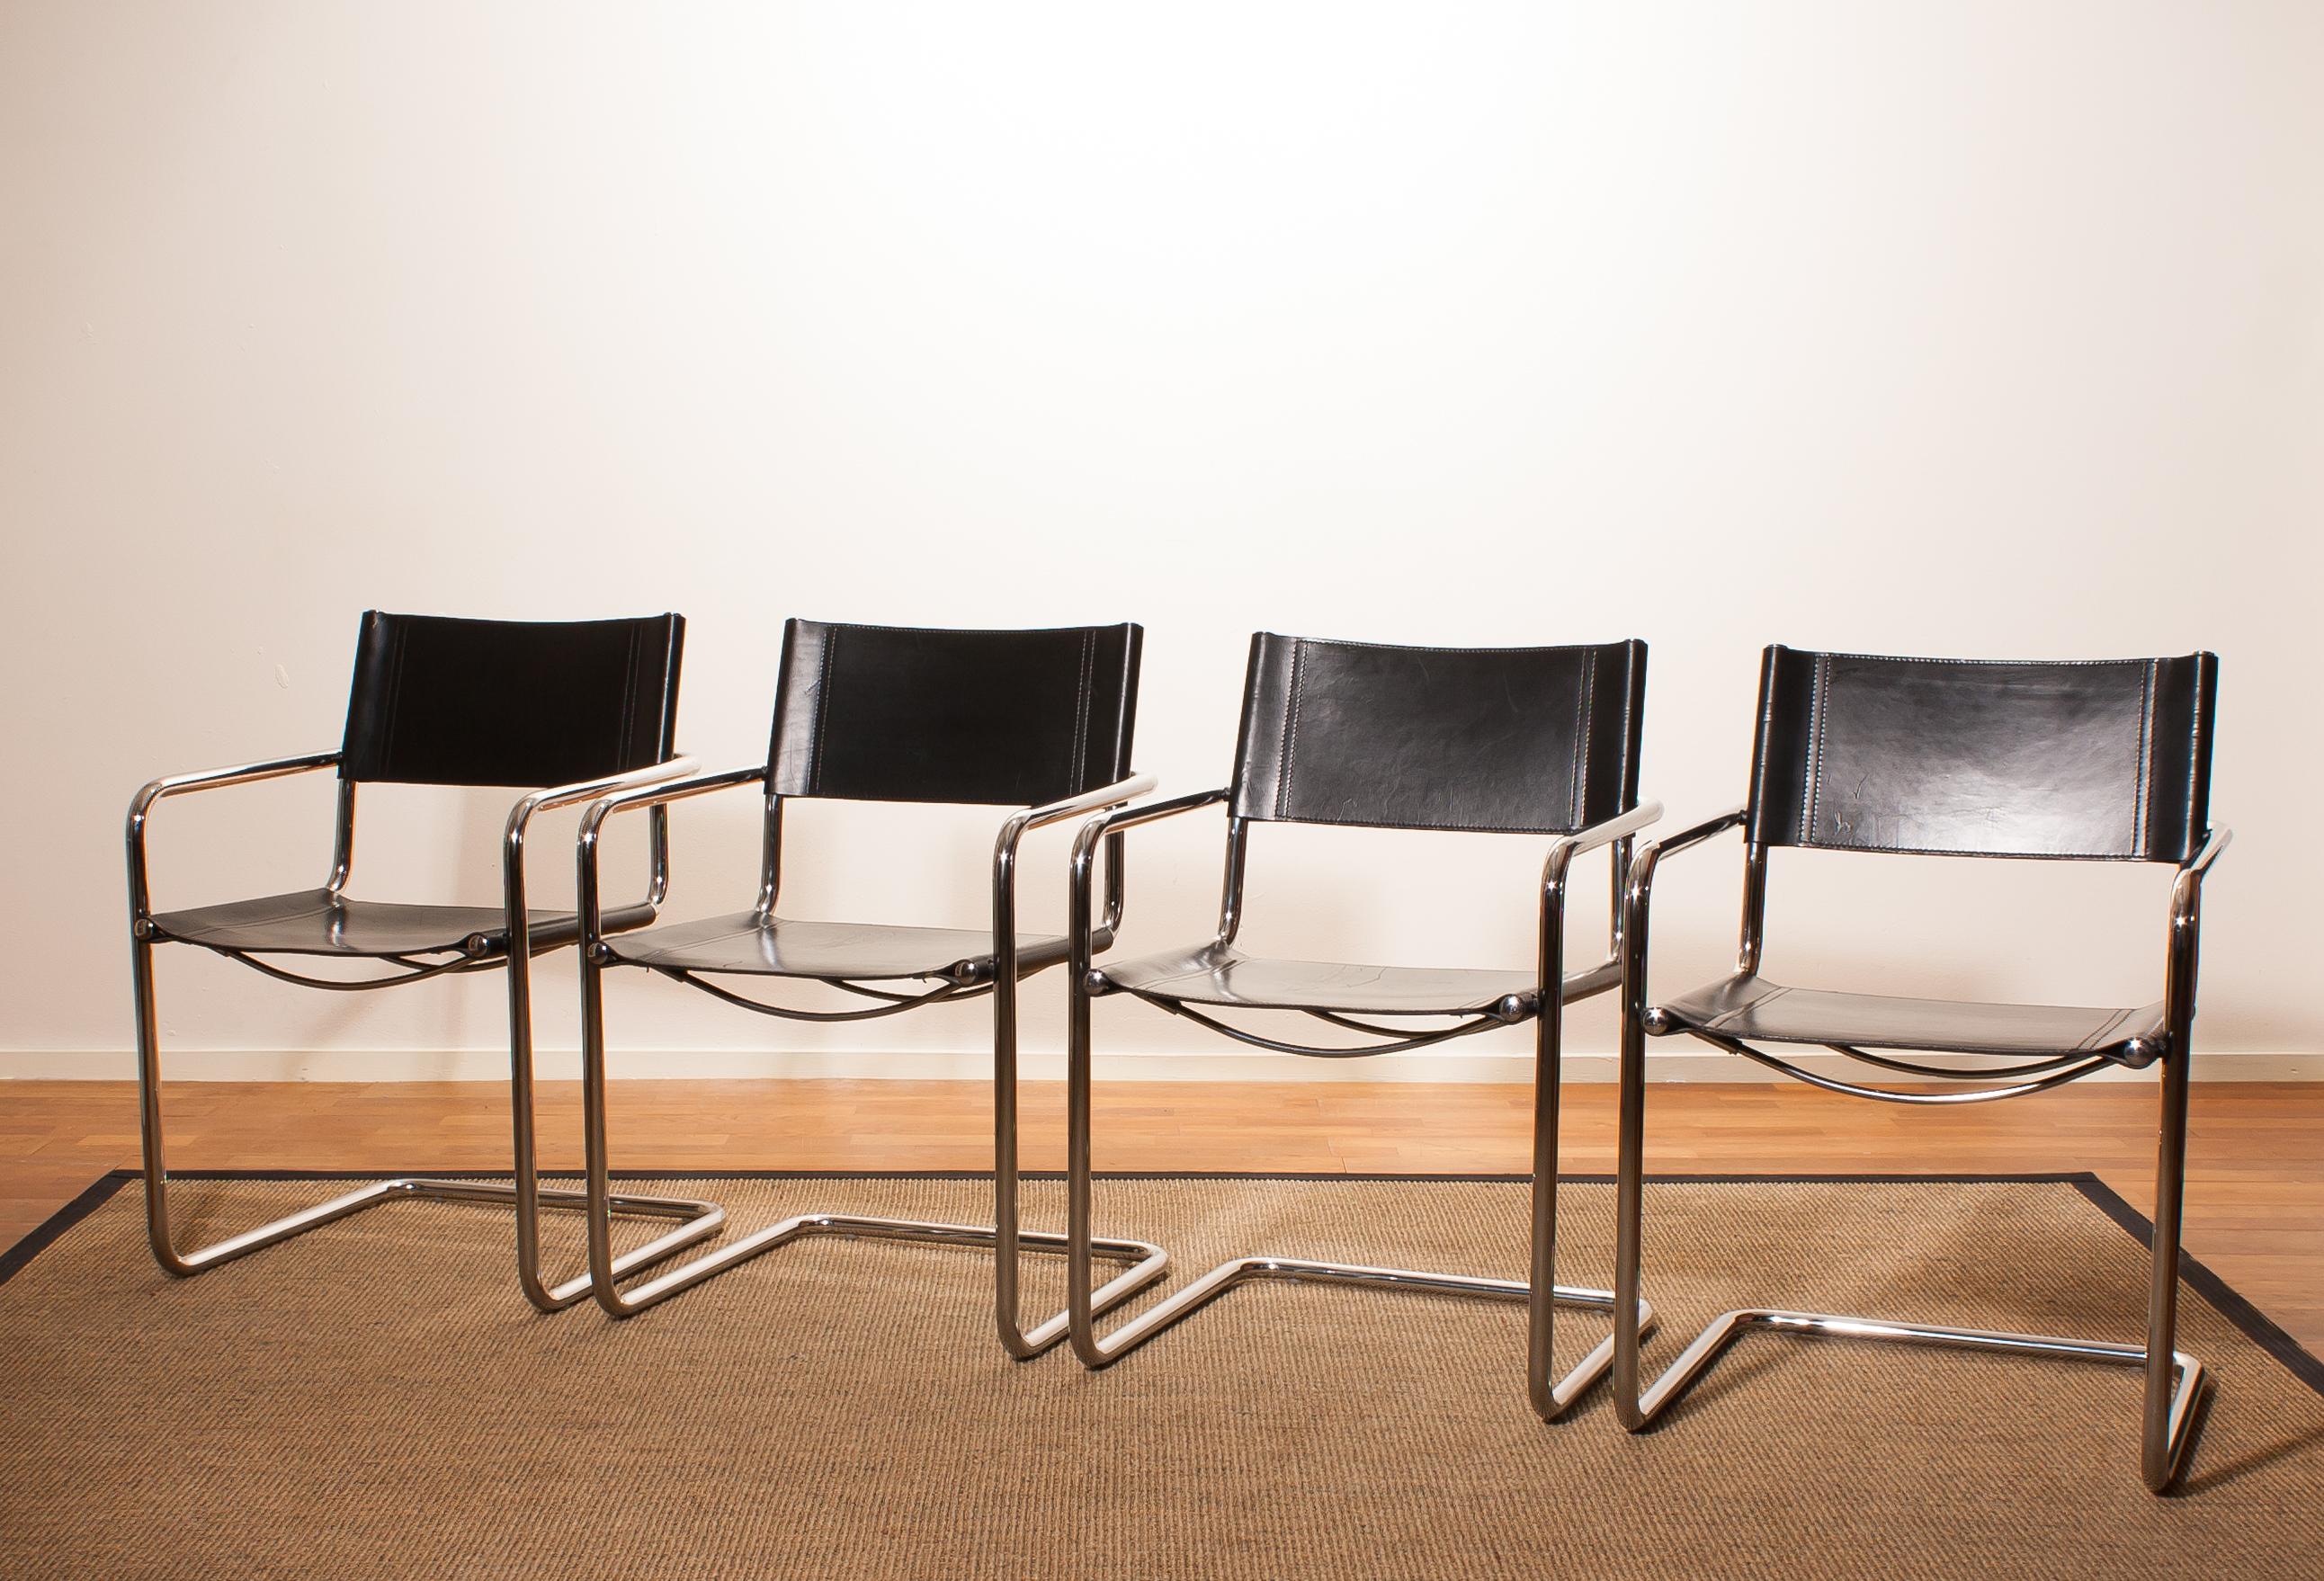 Italian 1970s, 4 Tubular Steel and Sturdy Black Leather Dining Chairs by Matteo Grassi